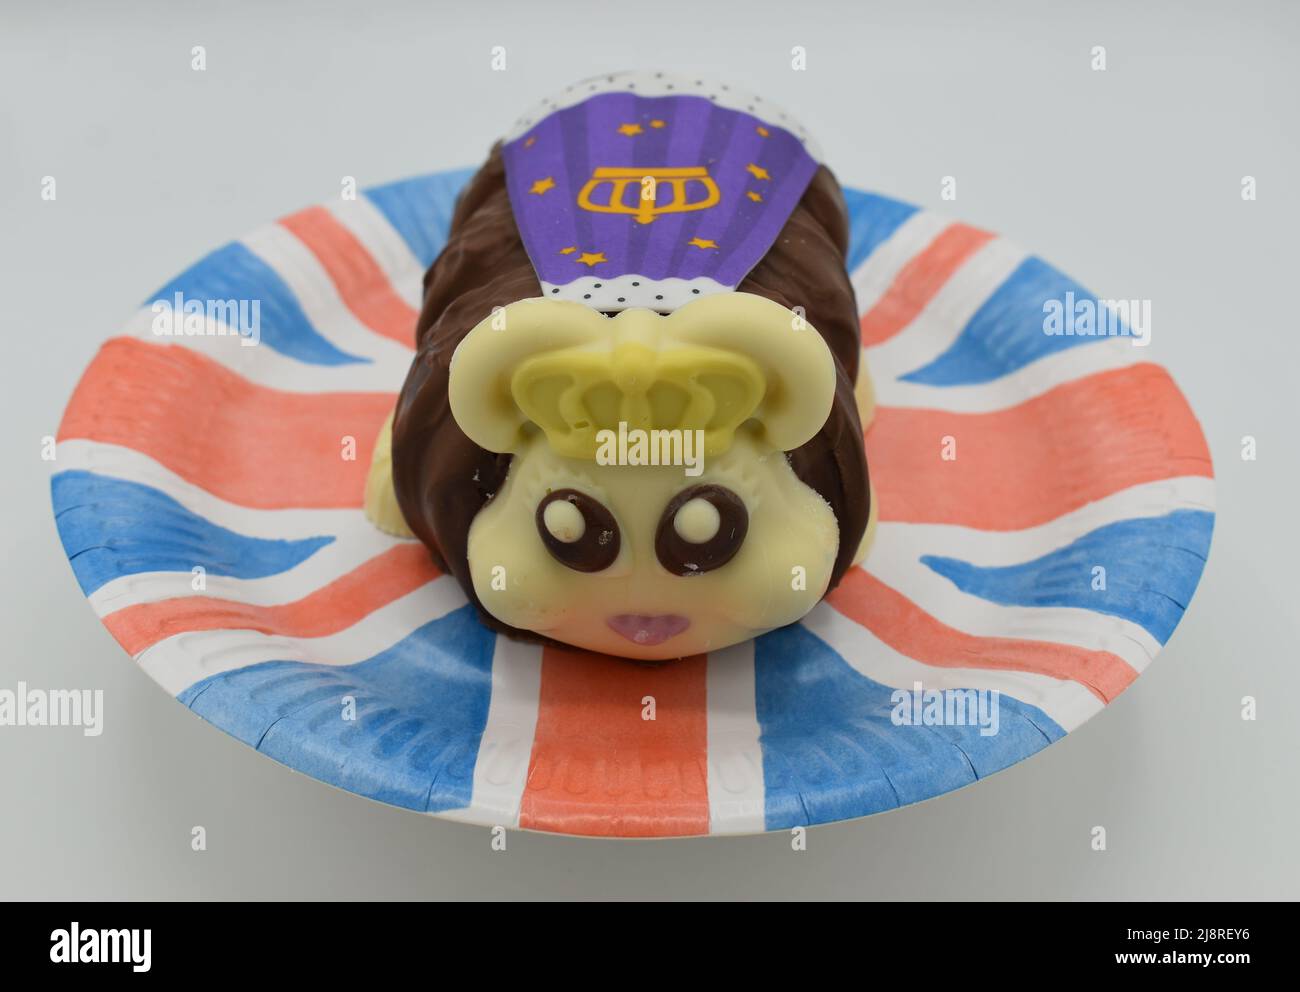 Marks and Spencer produced the Corgi and Queen Connie the Caterpillar Cake for the Queen’s Platinum Jubilee. This is Queen Connie the Caterpillar cake. Stock Photo